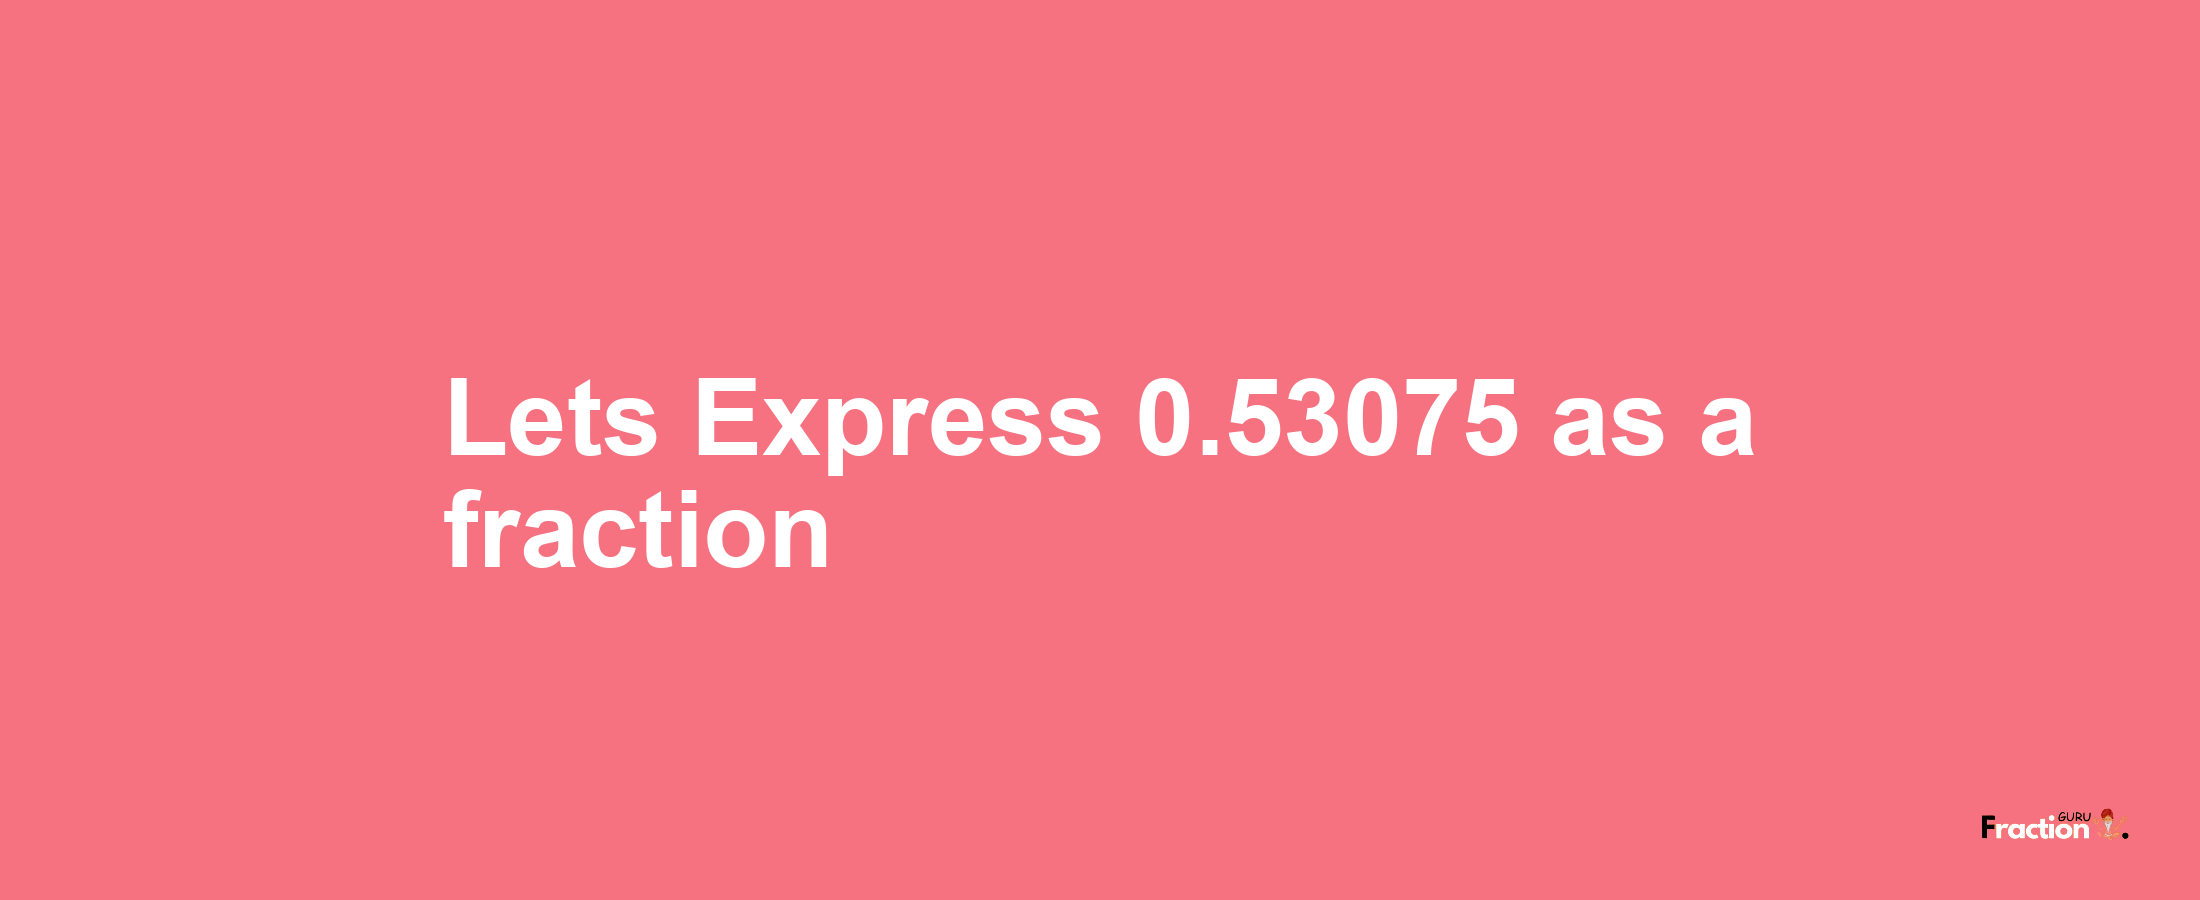 Lets Express 0.53075 as afraction